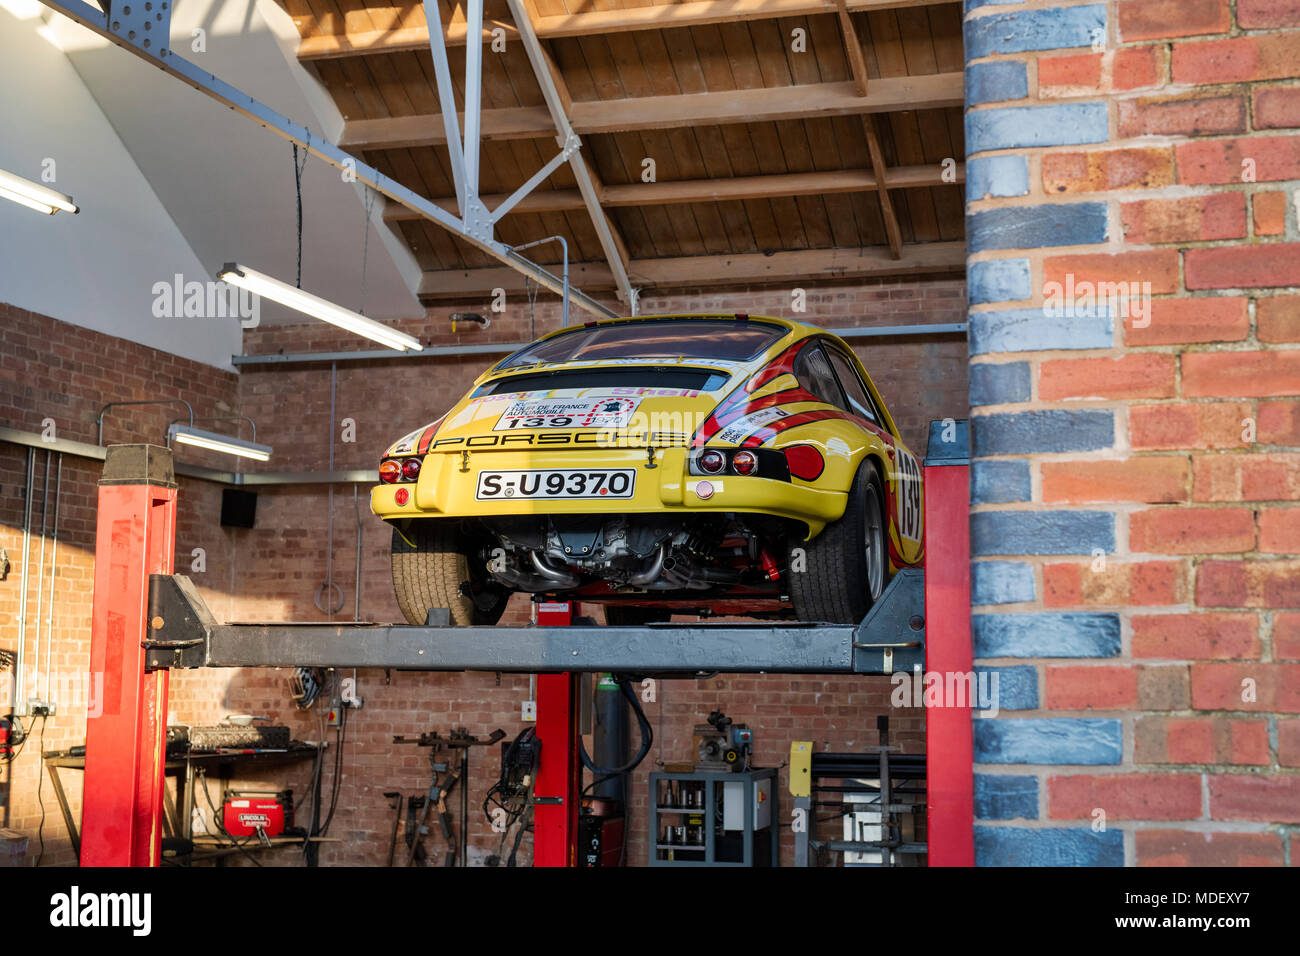 Racing porsche on a car ramp at Bicester heritage centre. Bicester, Oxfordshire, England Stock Photo